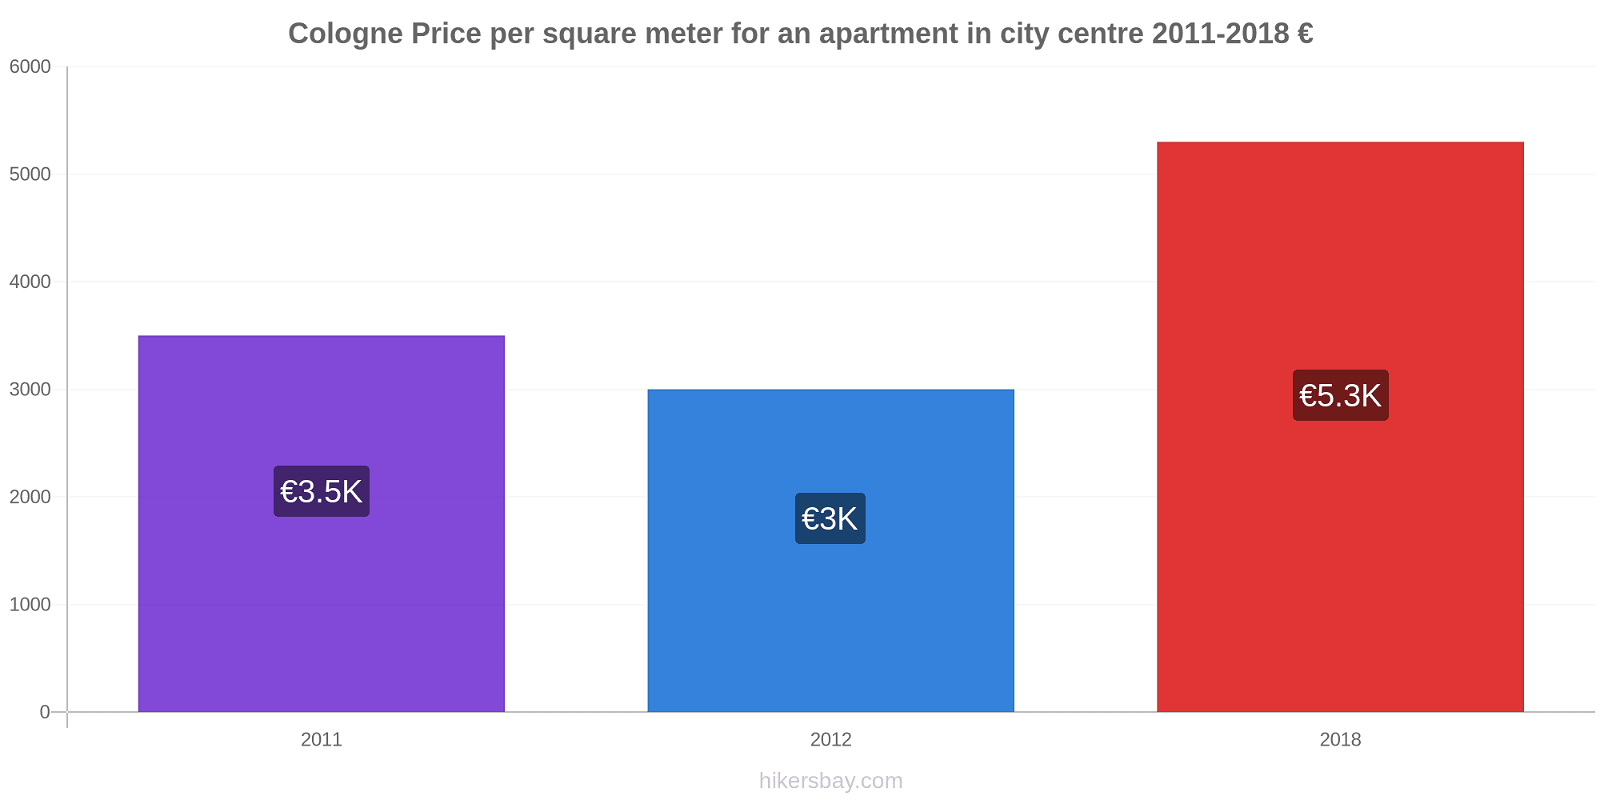 Cologne price changes Price per square meter for an apartment in city centre hikersbay.com